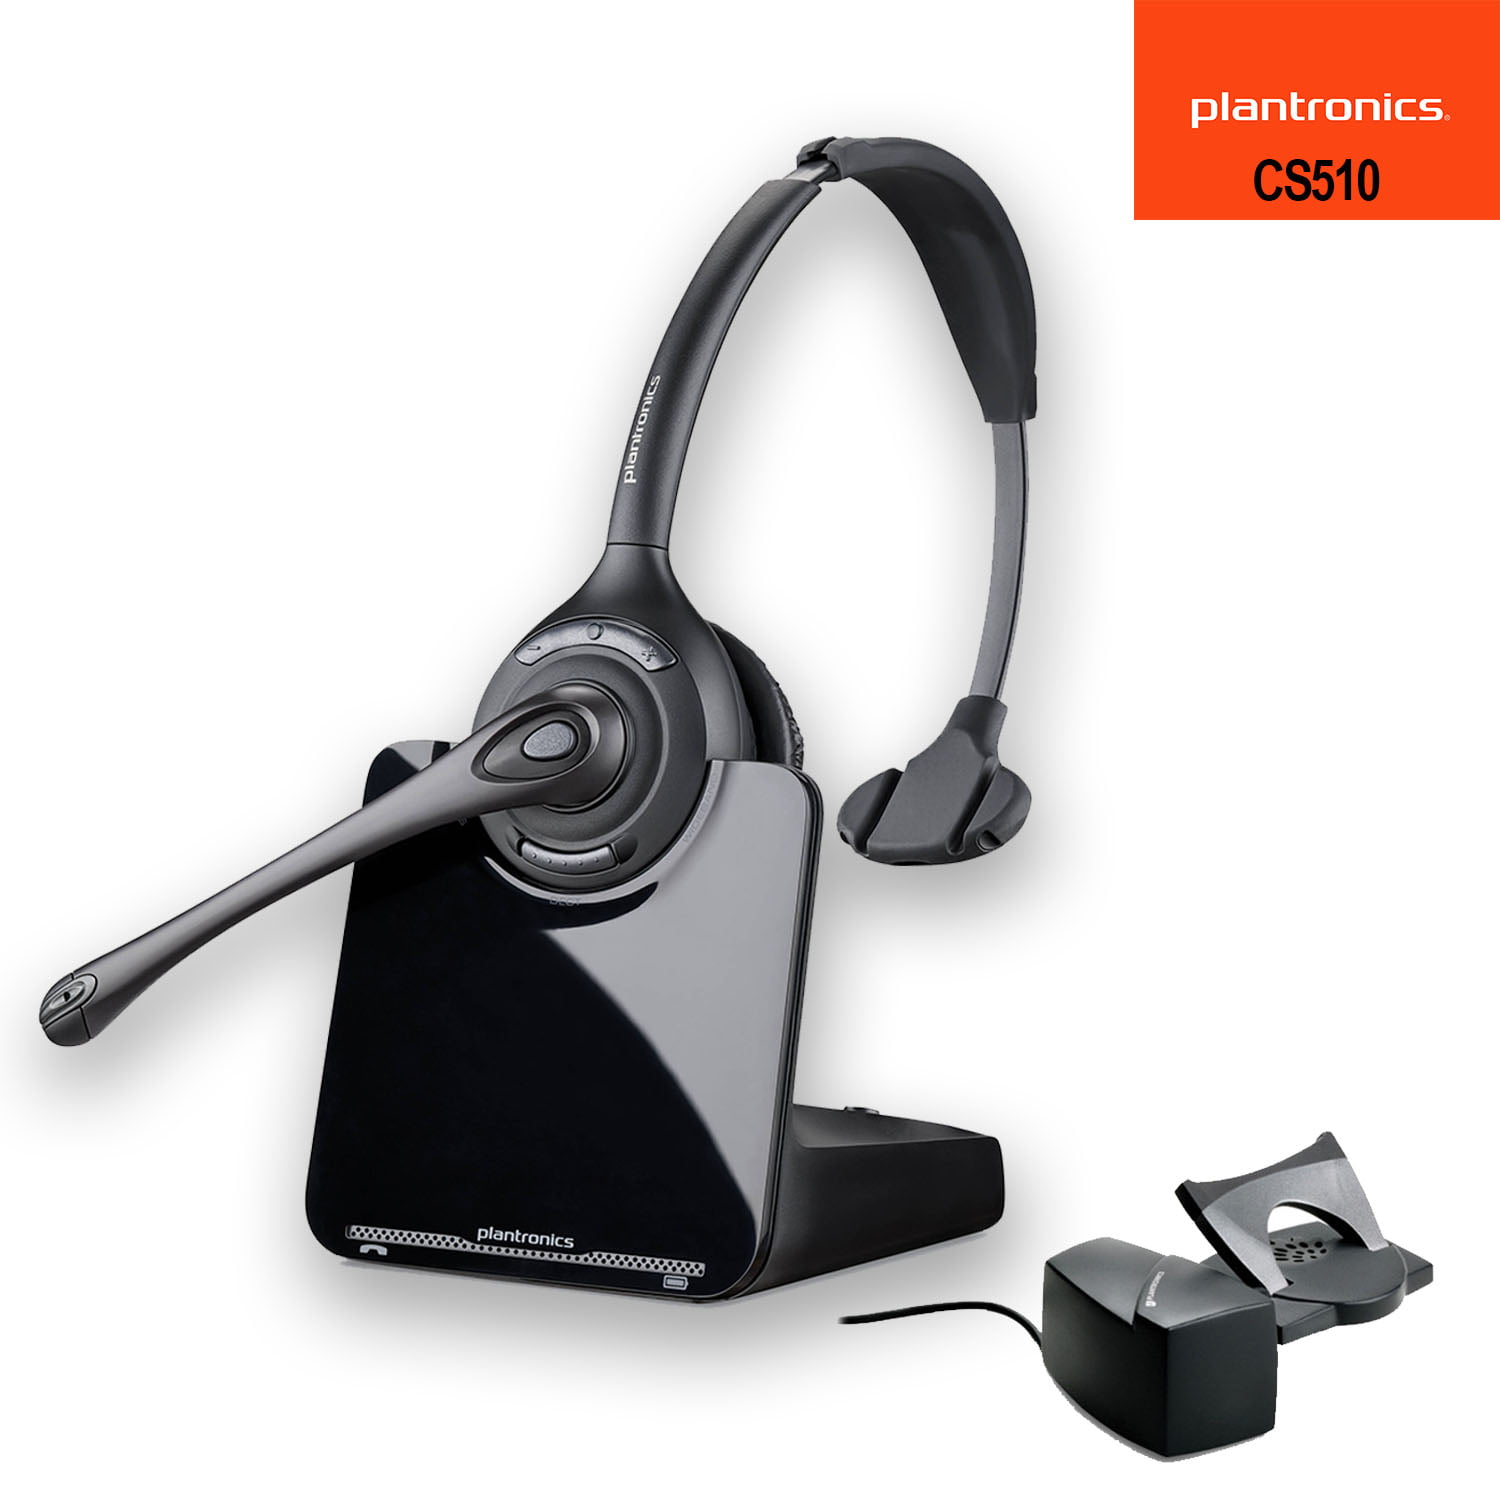 PLNCS510 Plantronics CS510 Headset with Handset Lifter Included 